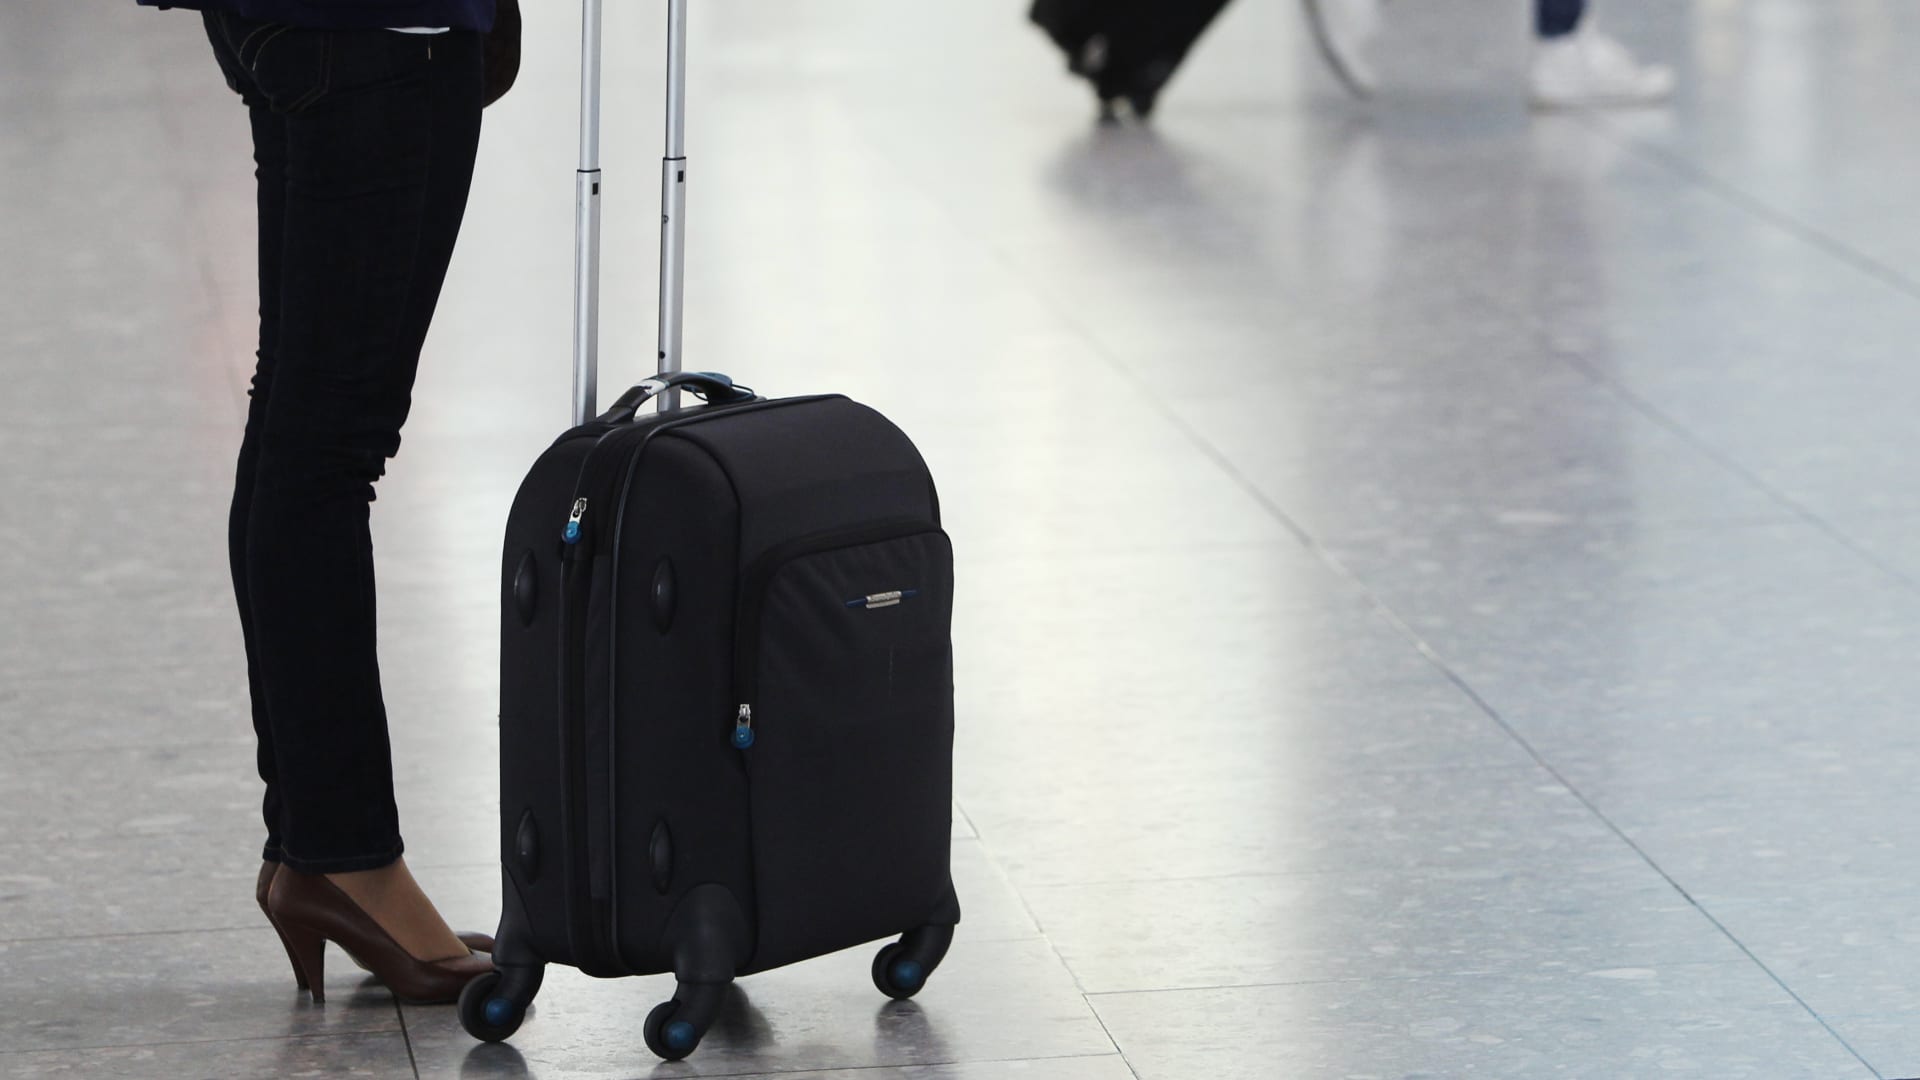 Business travel costs are expected to rise through 2023, report says